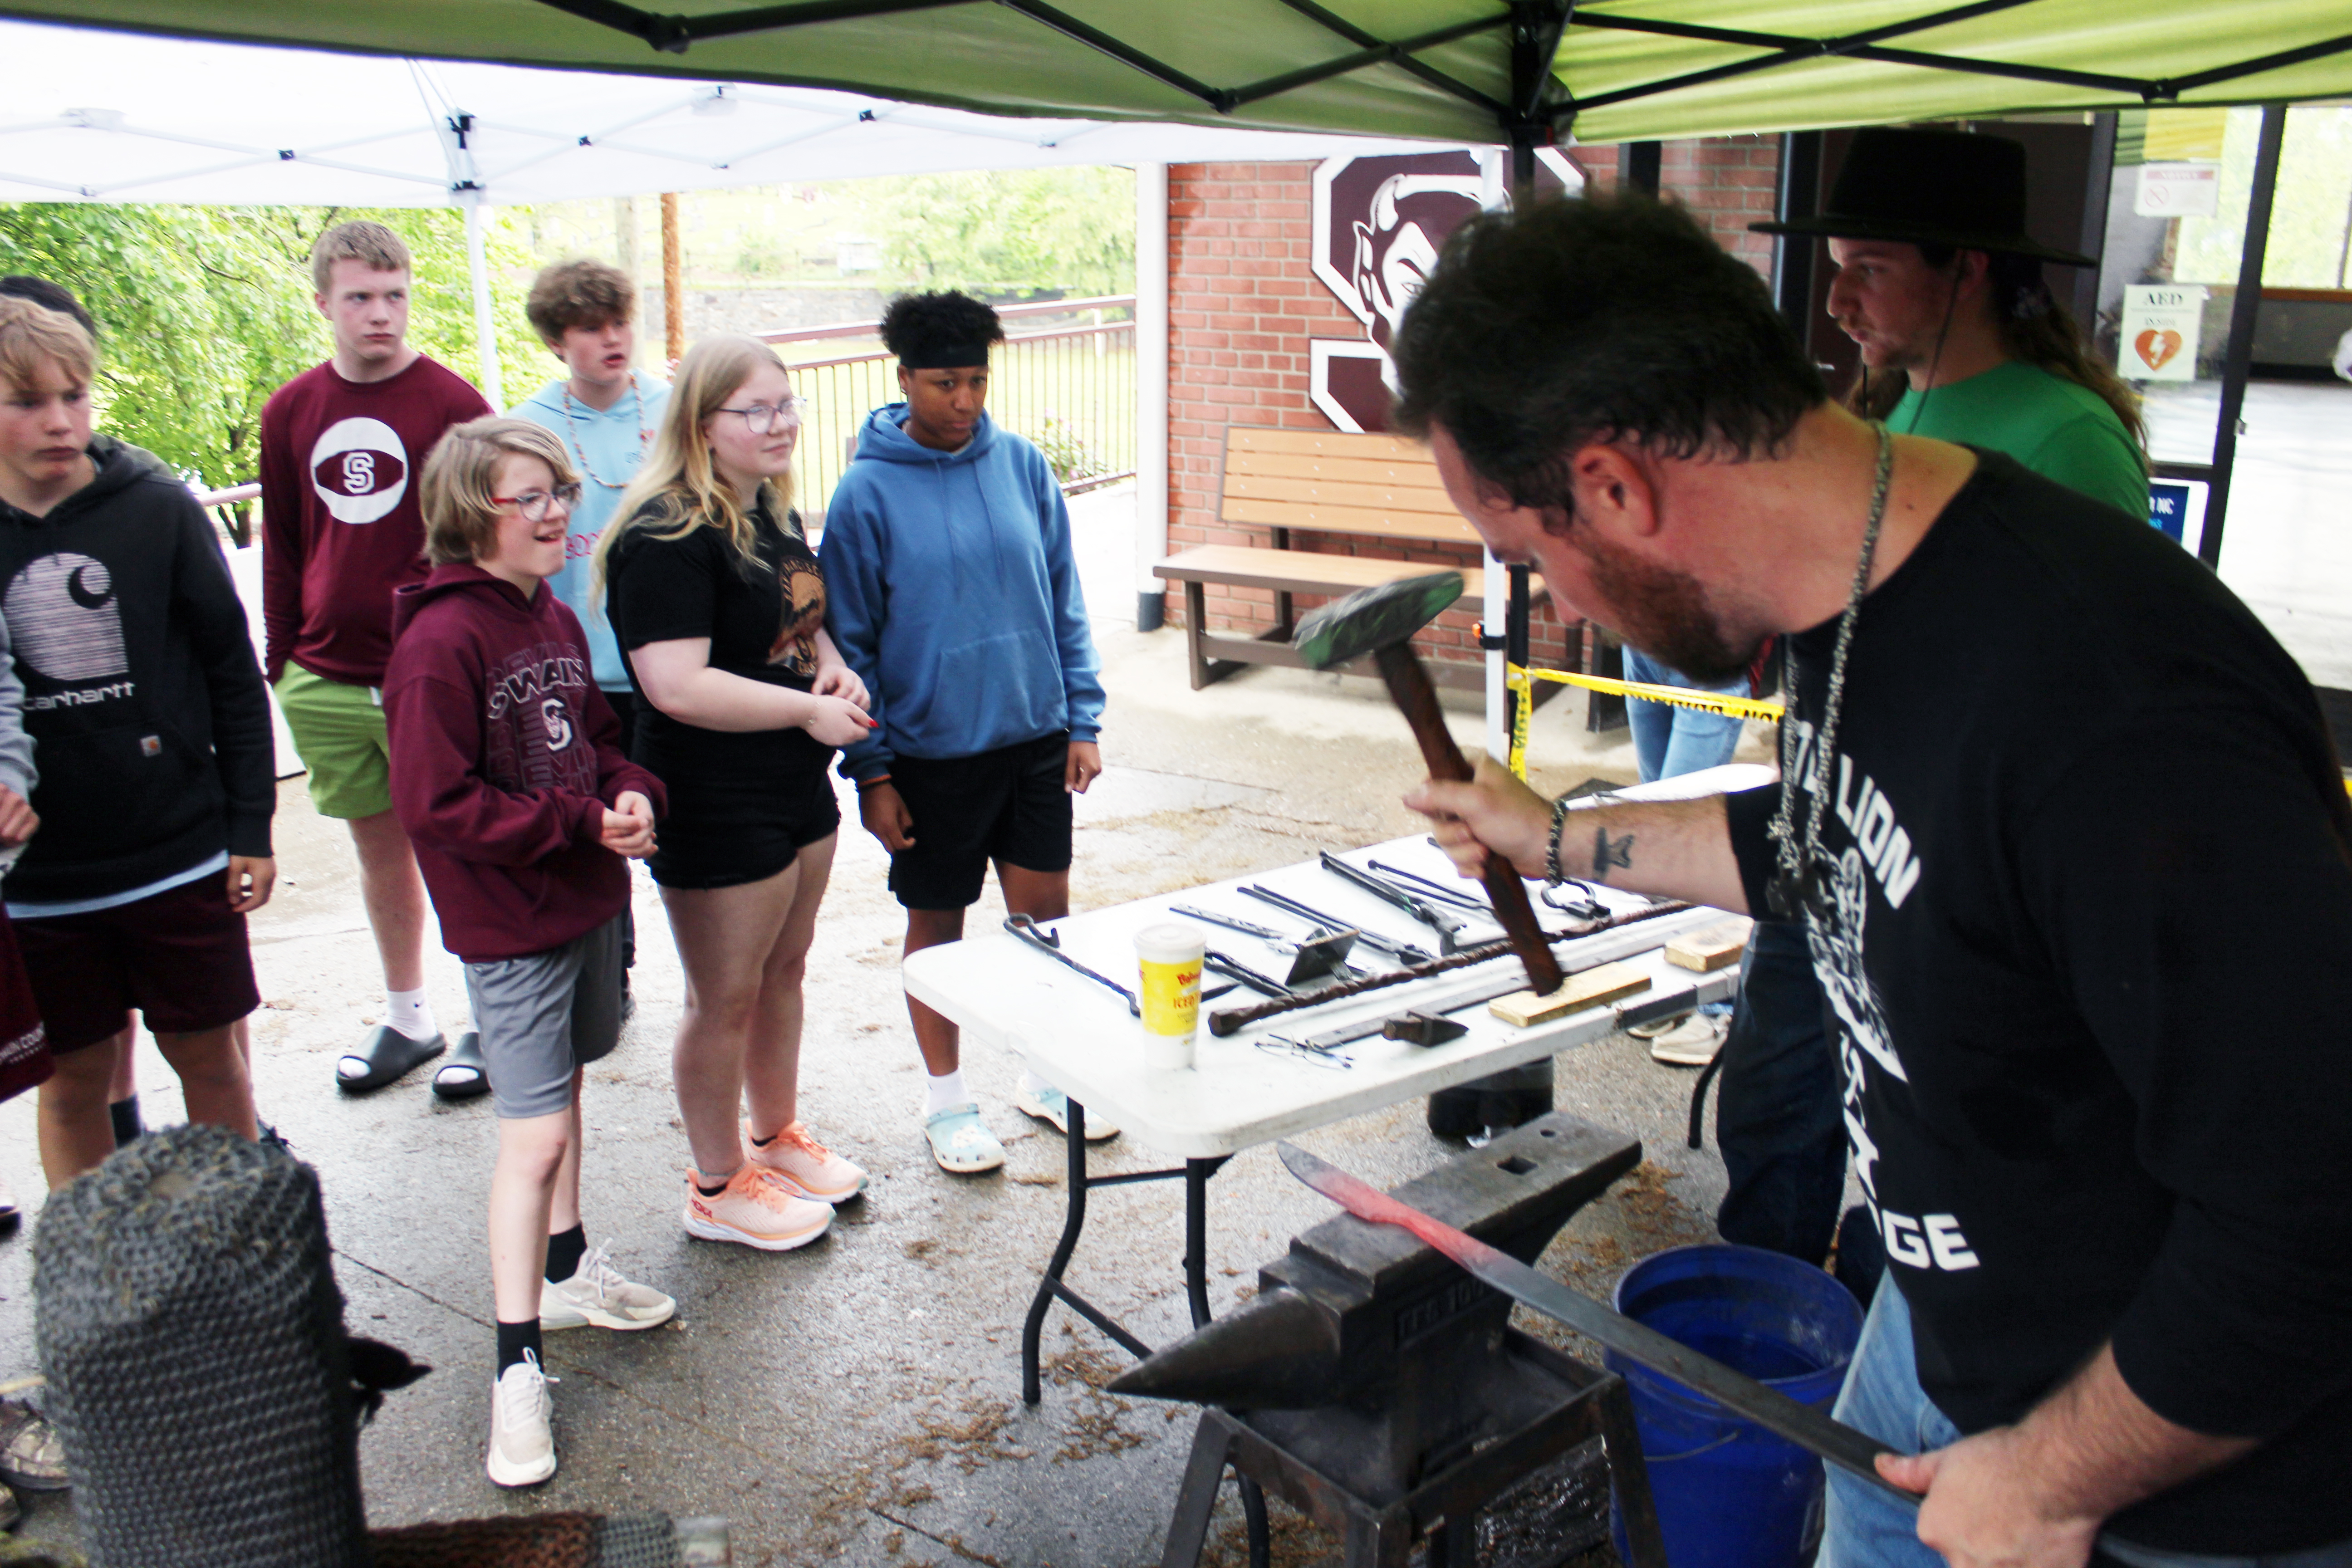 Jesse Bolding and Peyton Smith, artists at Jackson County Green Energy Park, were encouraging students to ask questions as Bolding hammers a chisel. Draven Shanks (front row first from left) was among the students who asked questions.